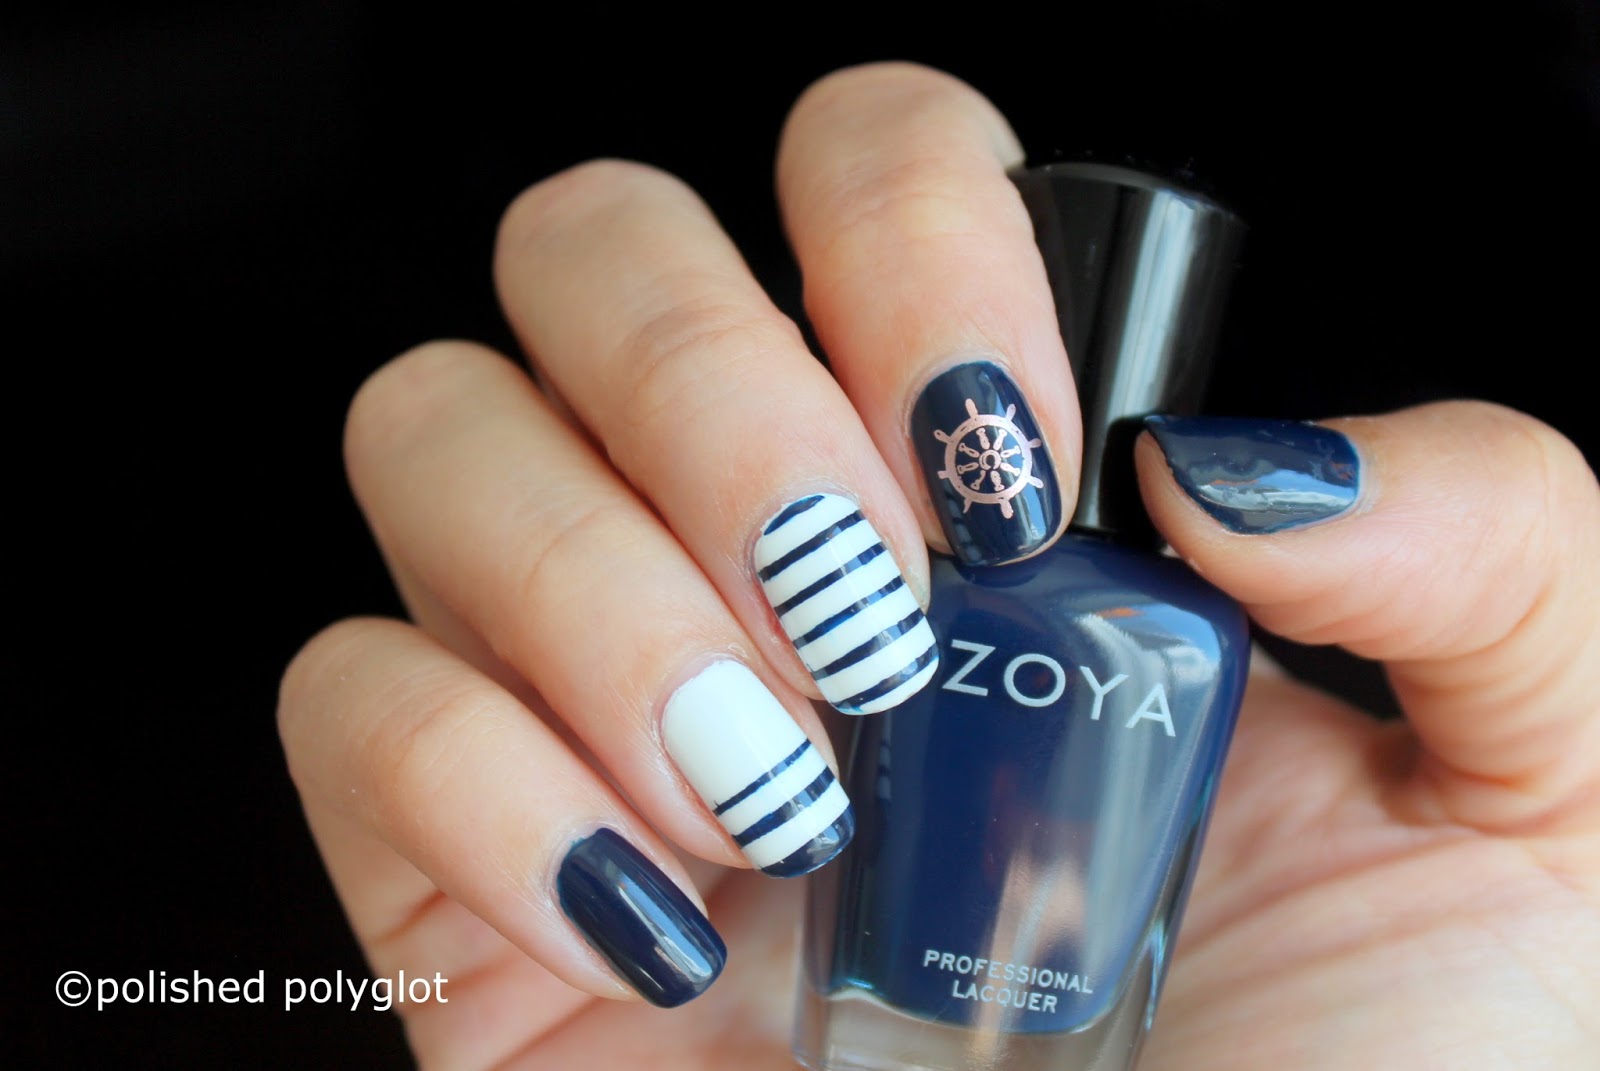 Navy Blue Decorated Nail